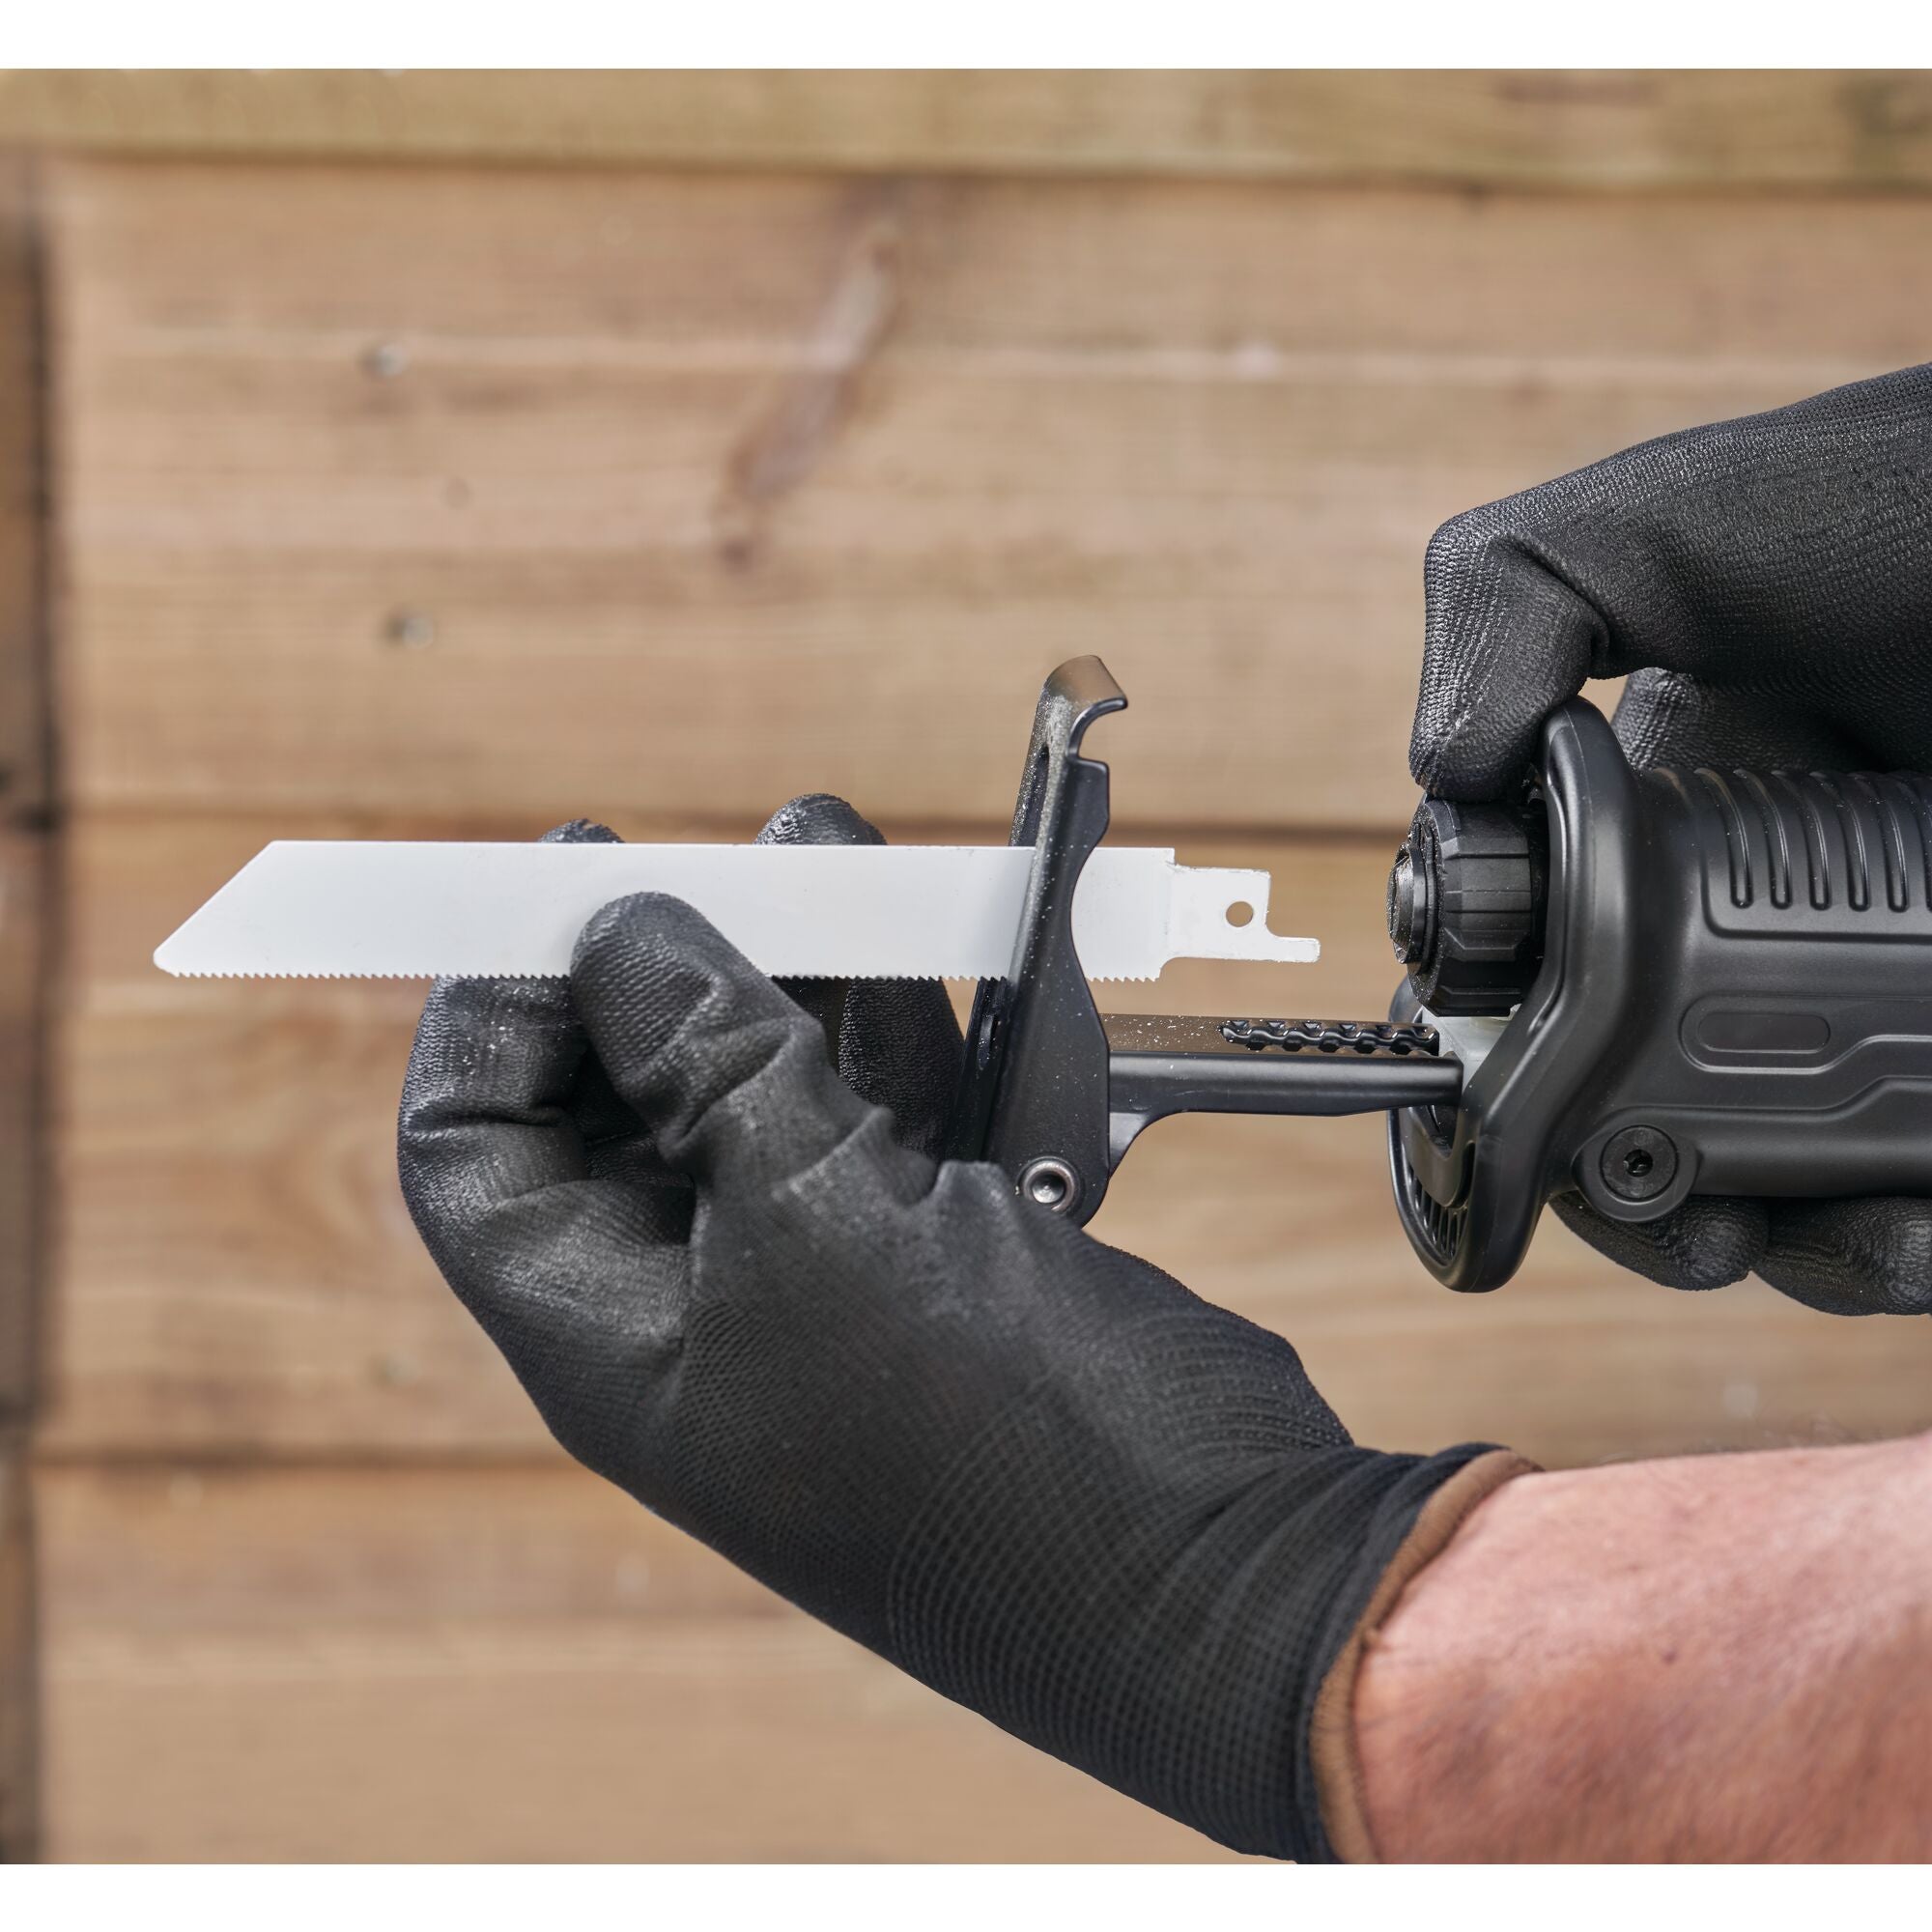 How to Change Reciprocating Saw Blades - Replace Black and Decker